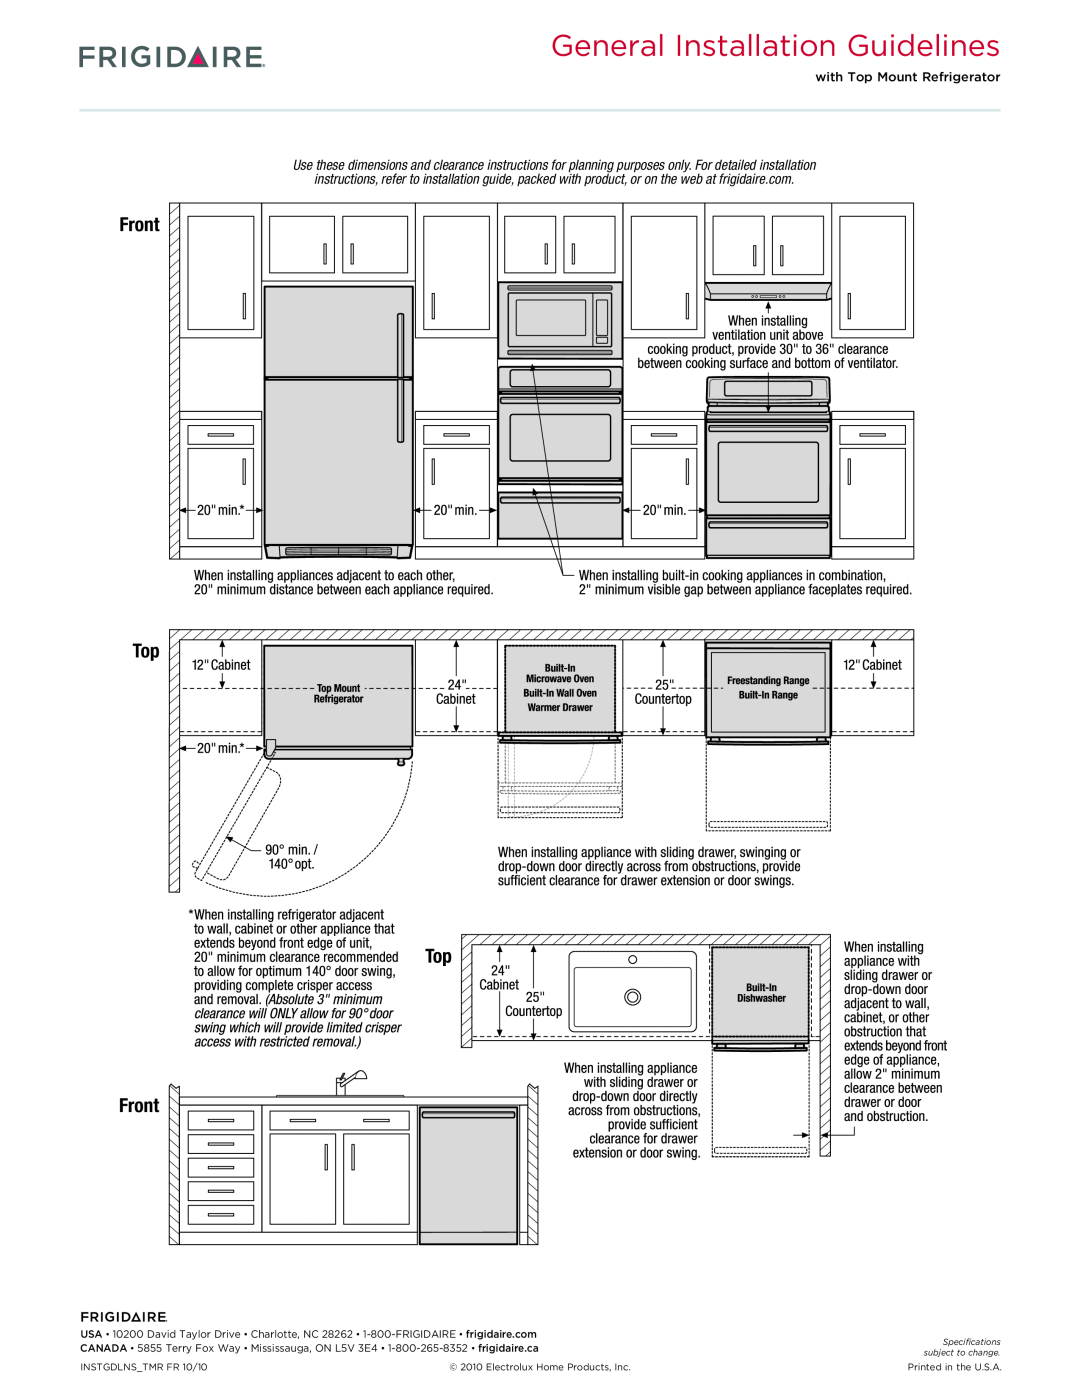 Frigidaire FGEW3045K F/W/B dimensions General Installation Guidelines, Top Front, with Top Mount Refrigerator 